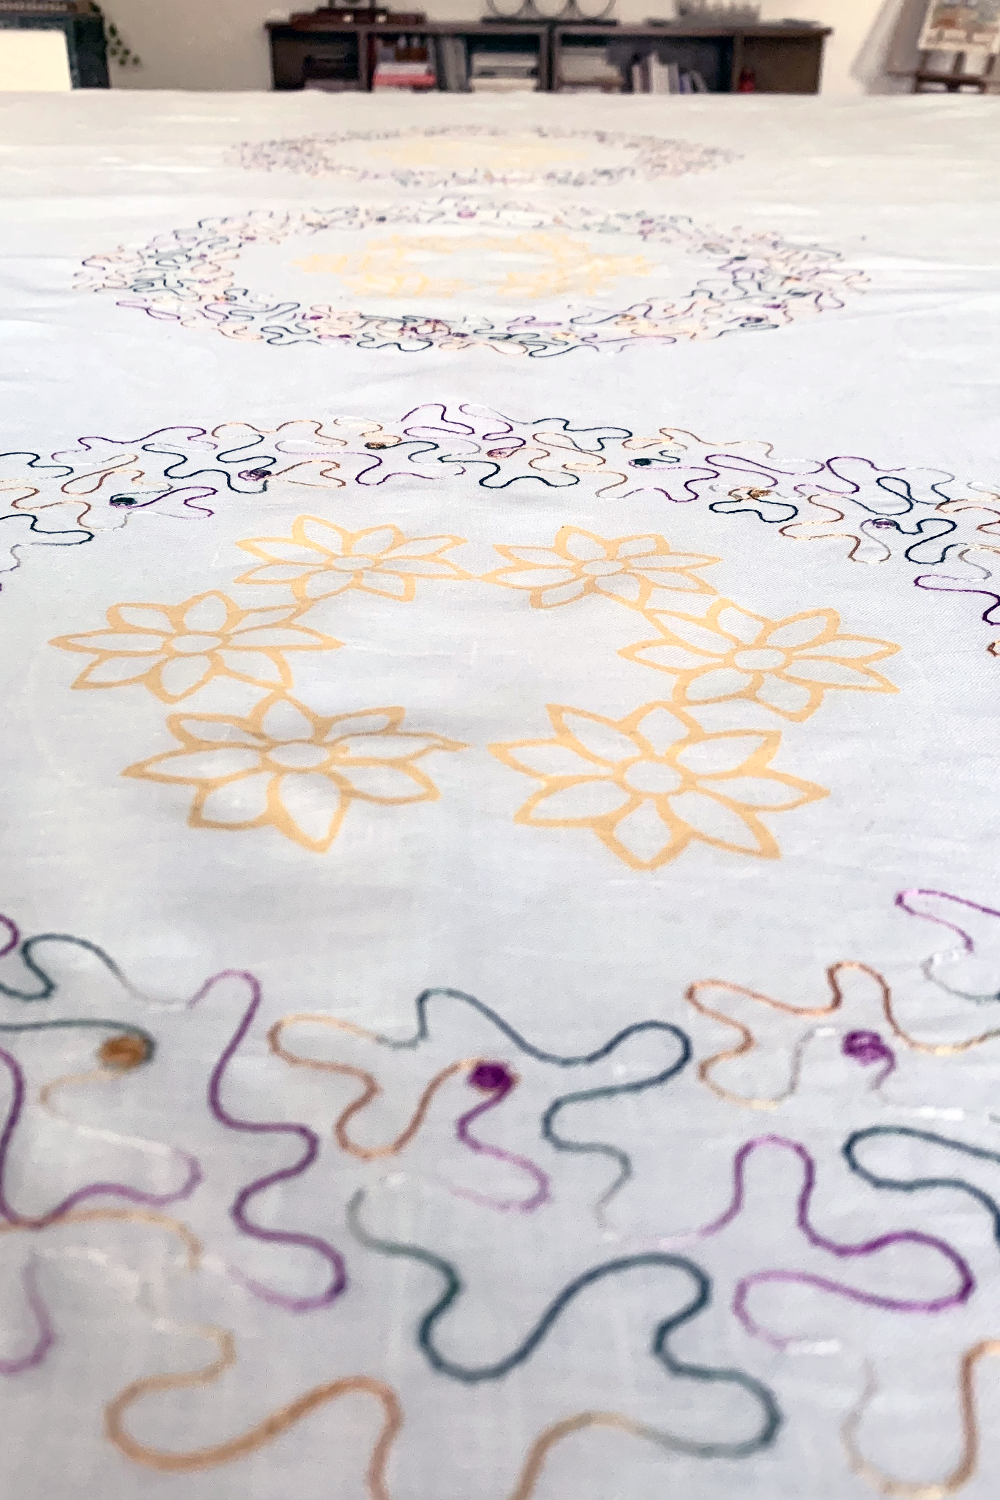 Luminous Flower Blockprinted and Embroidered Tablecloth